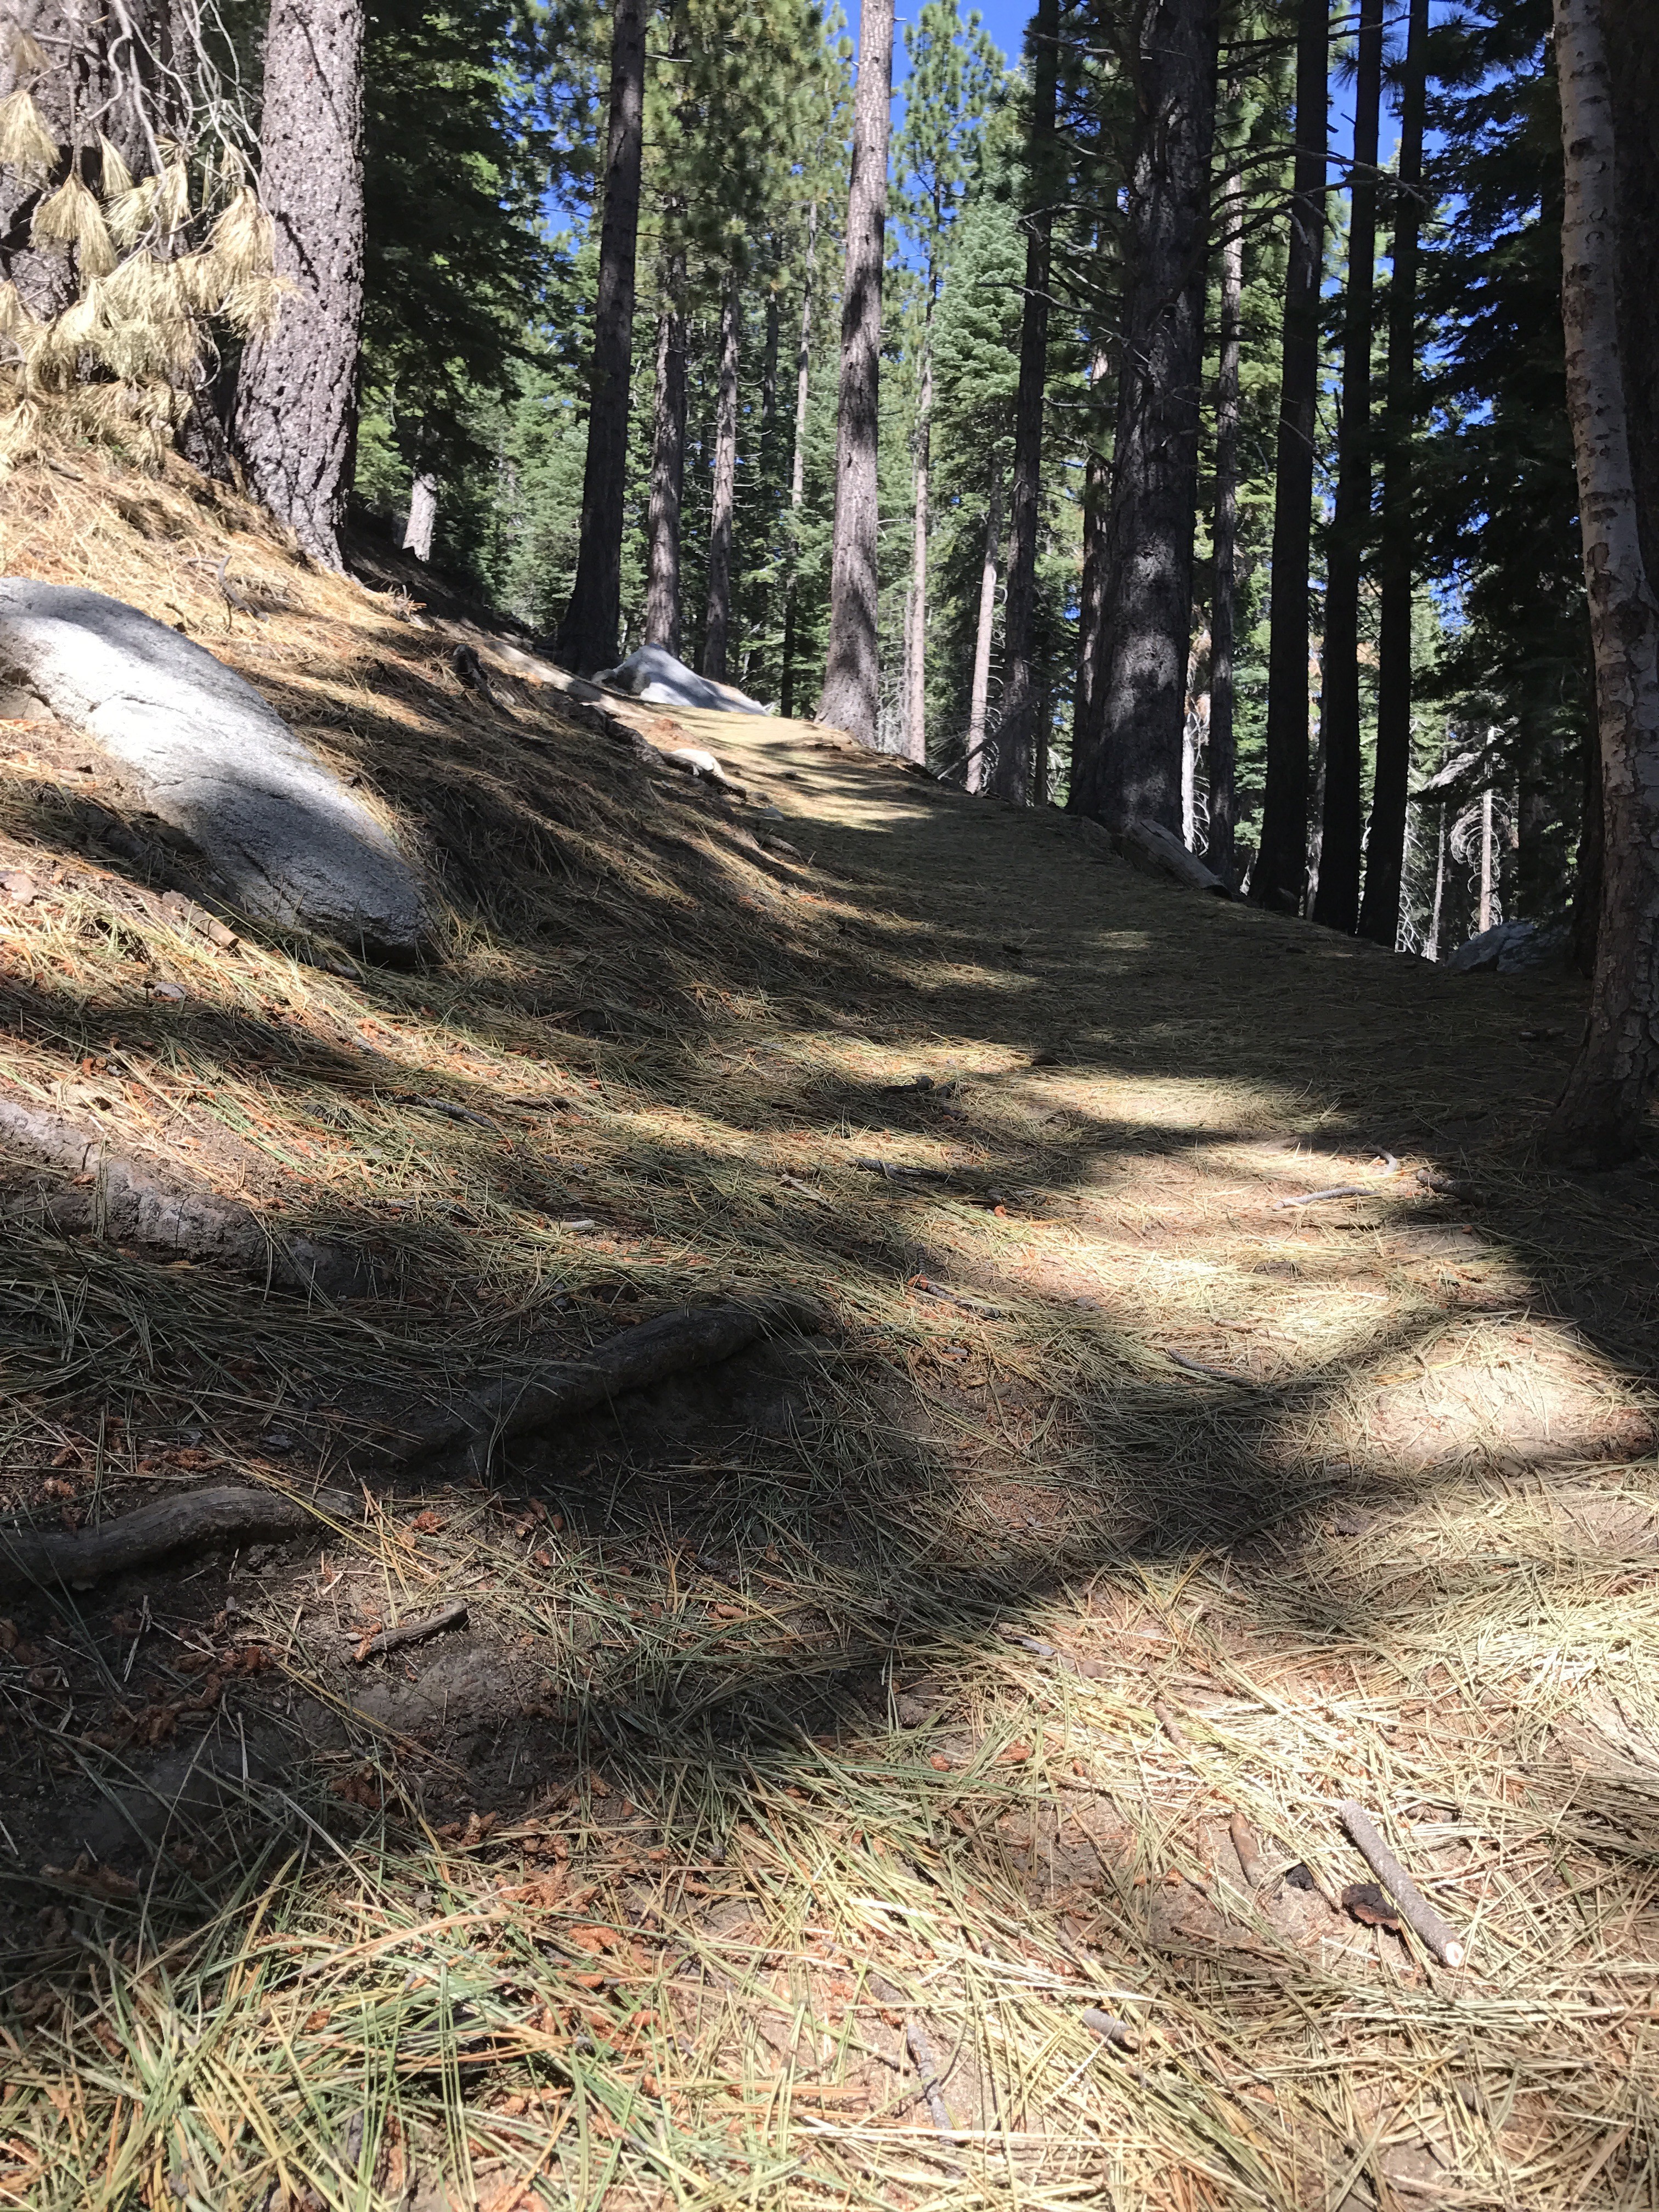 Trail climbs steeper uphill. In 2017, there was a lot more rainfall and I was there a week or two later than usual, so many pine needles covering the trail. 8/24/2017 Lake Tahoe